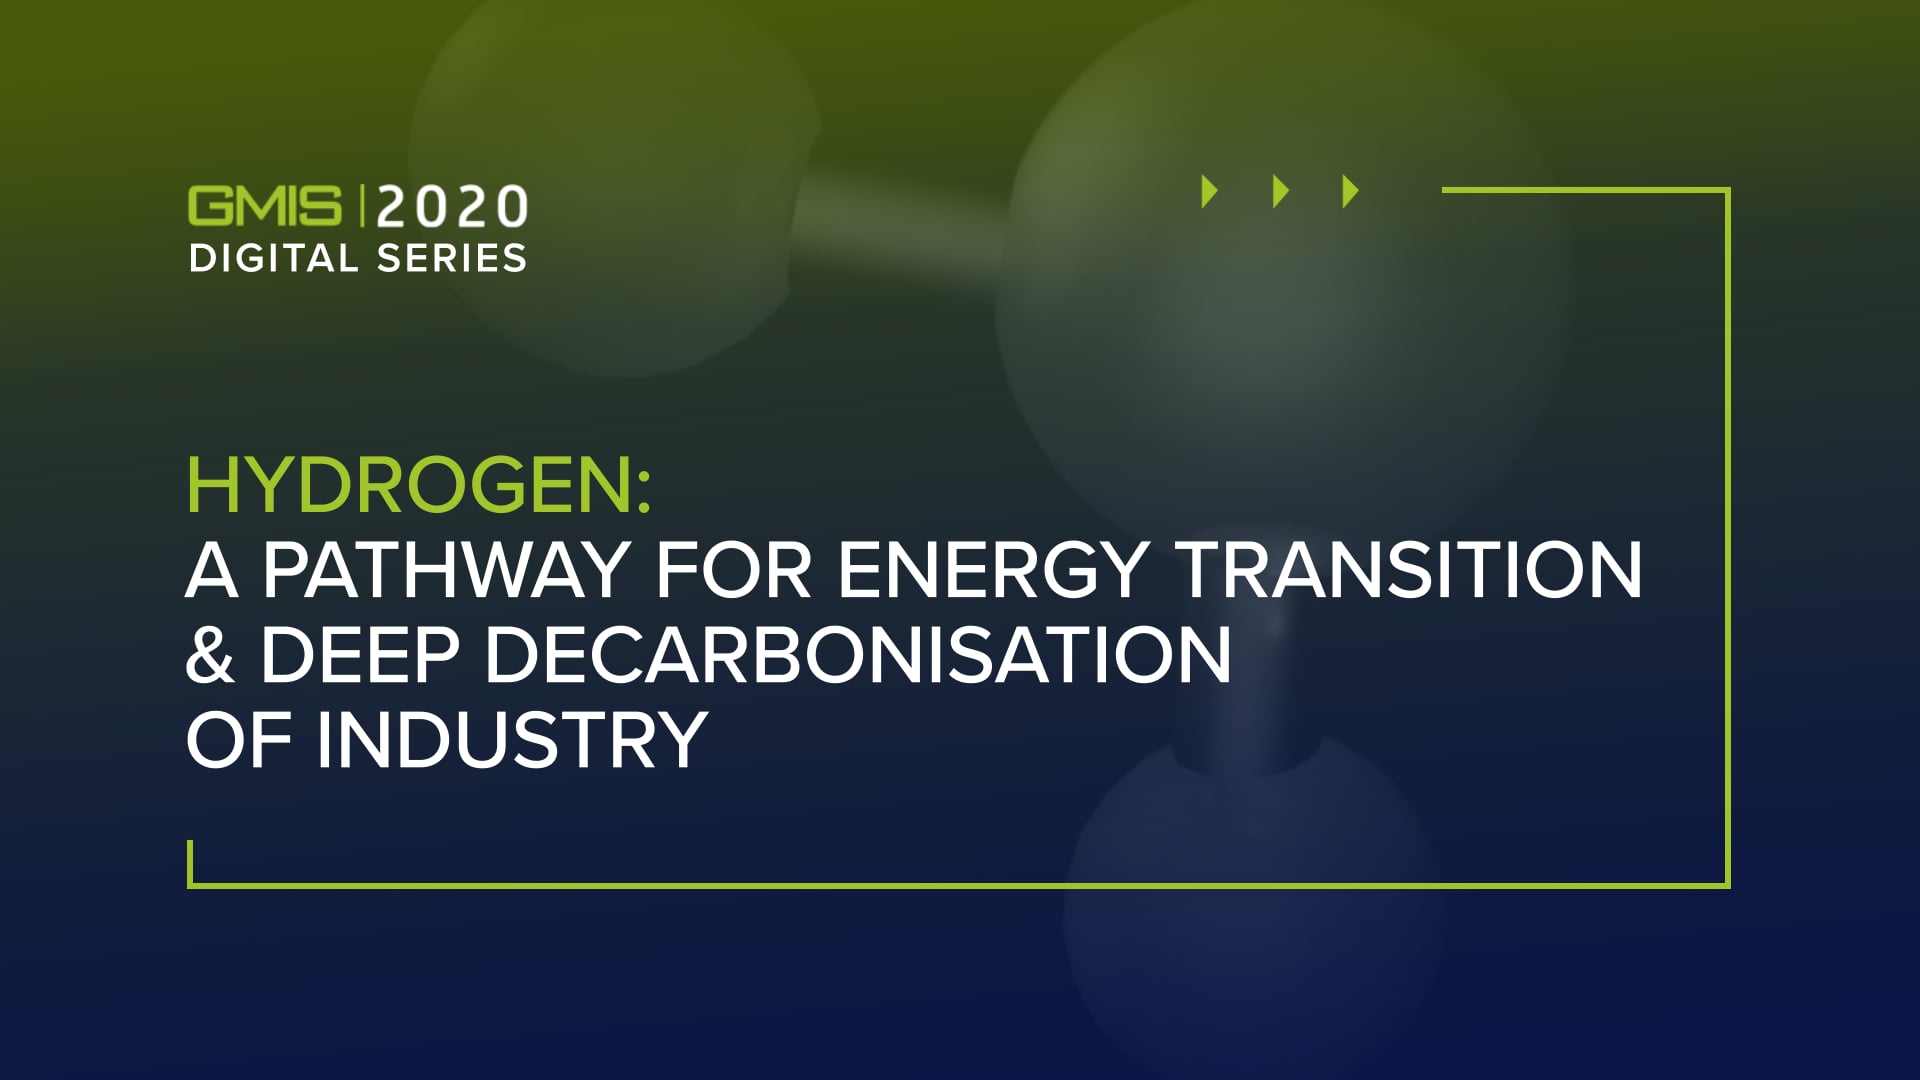 Hydrogen: A Pathway for Energy Transition and Deep Decarbonisation of Industry